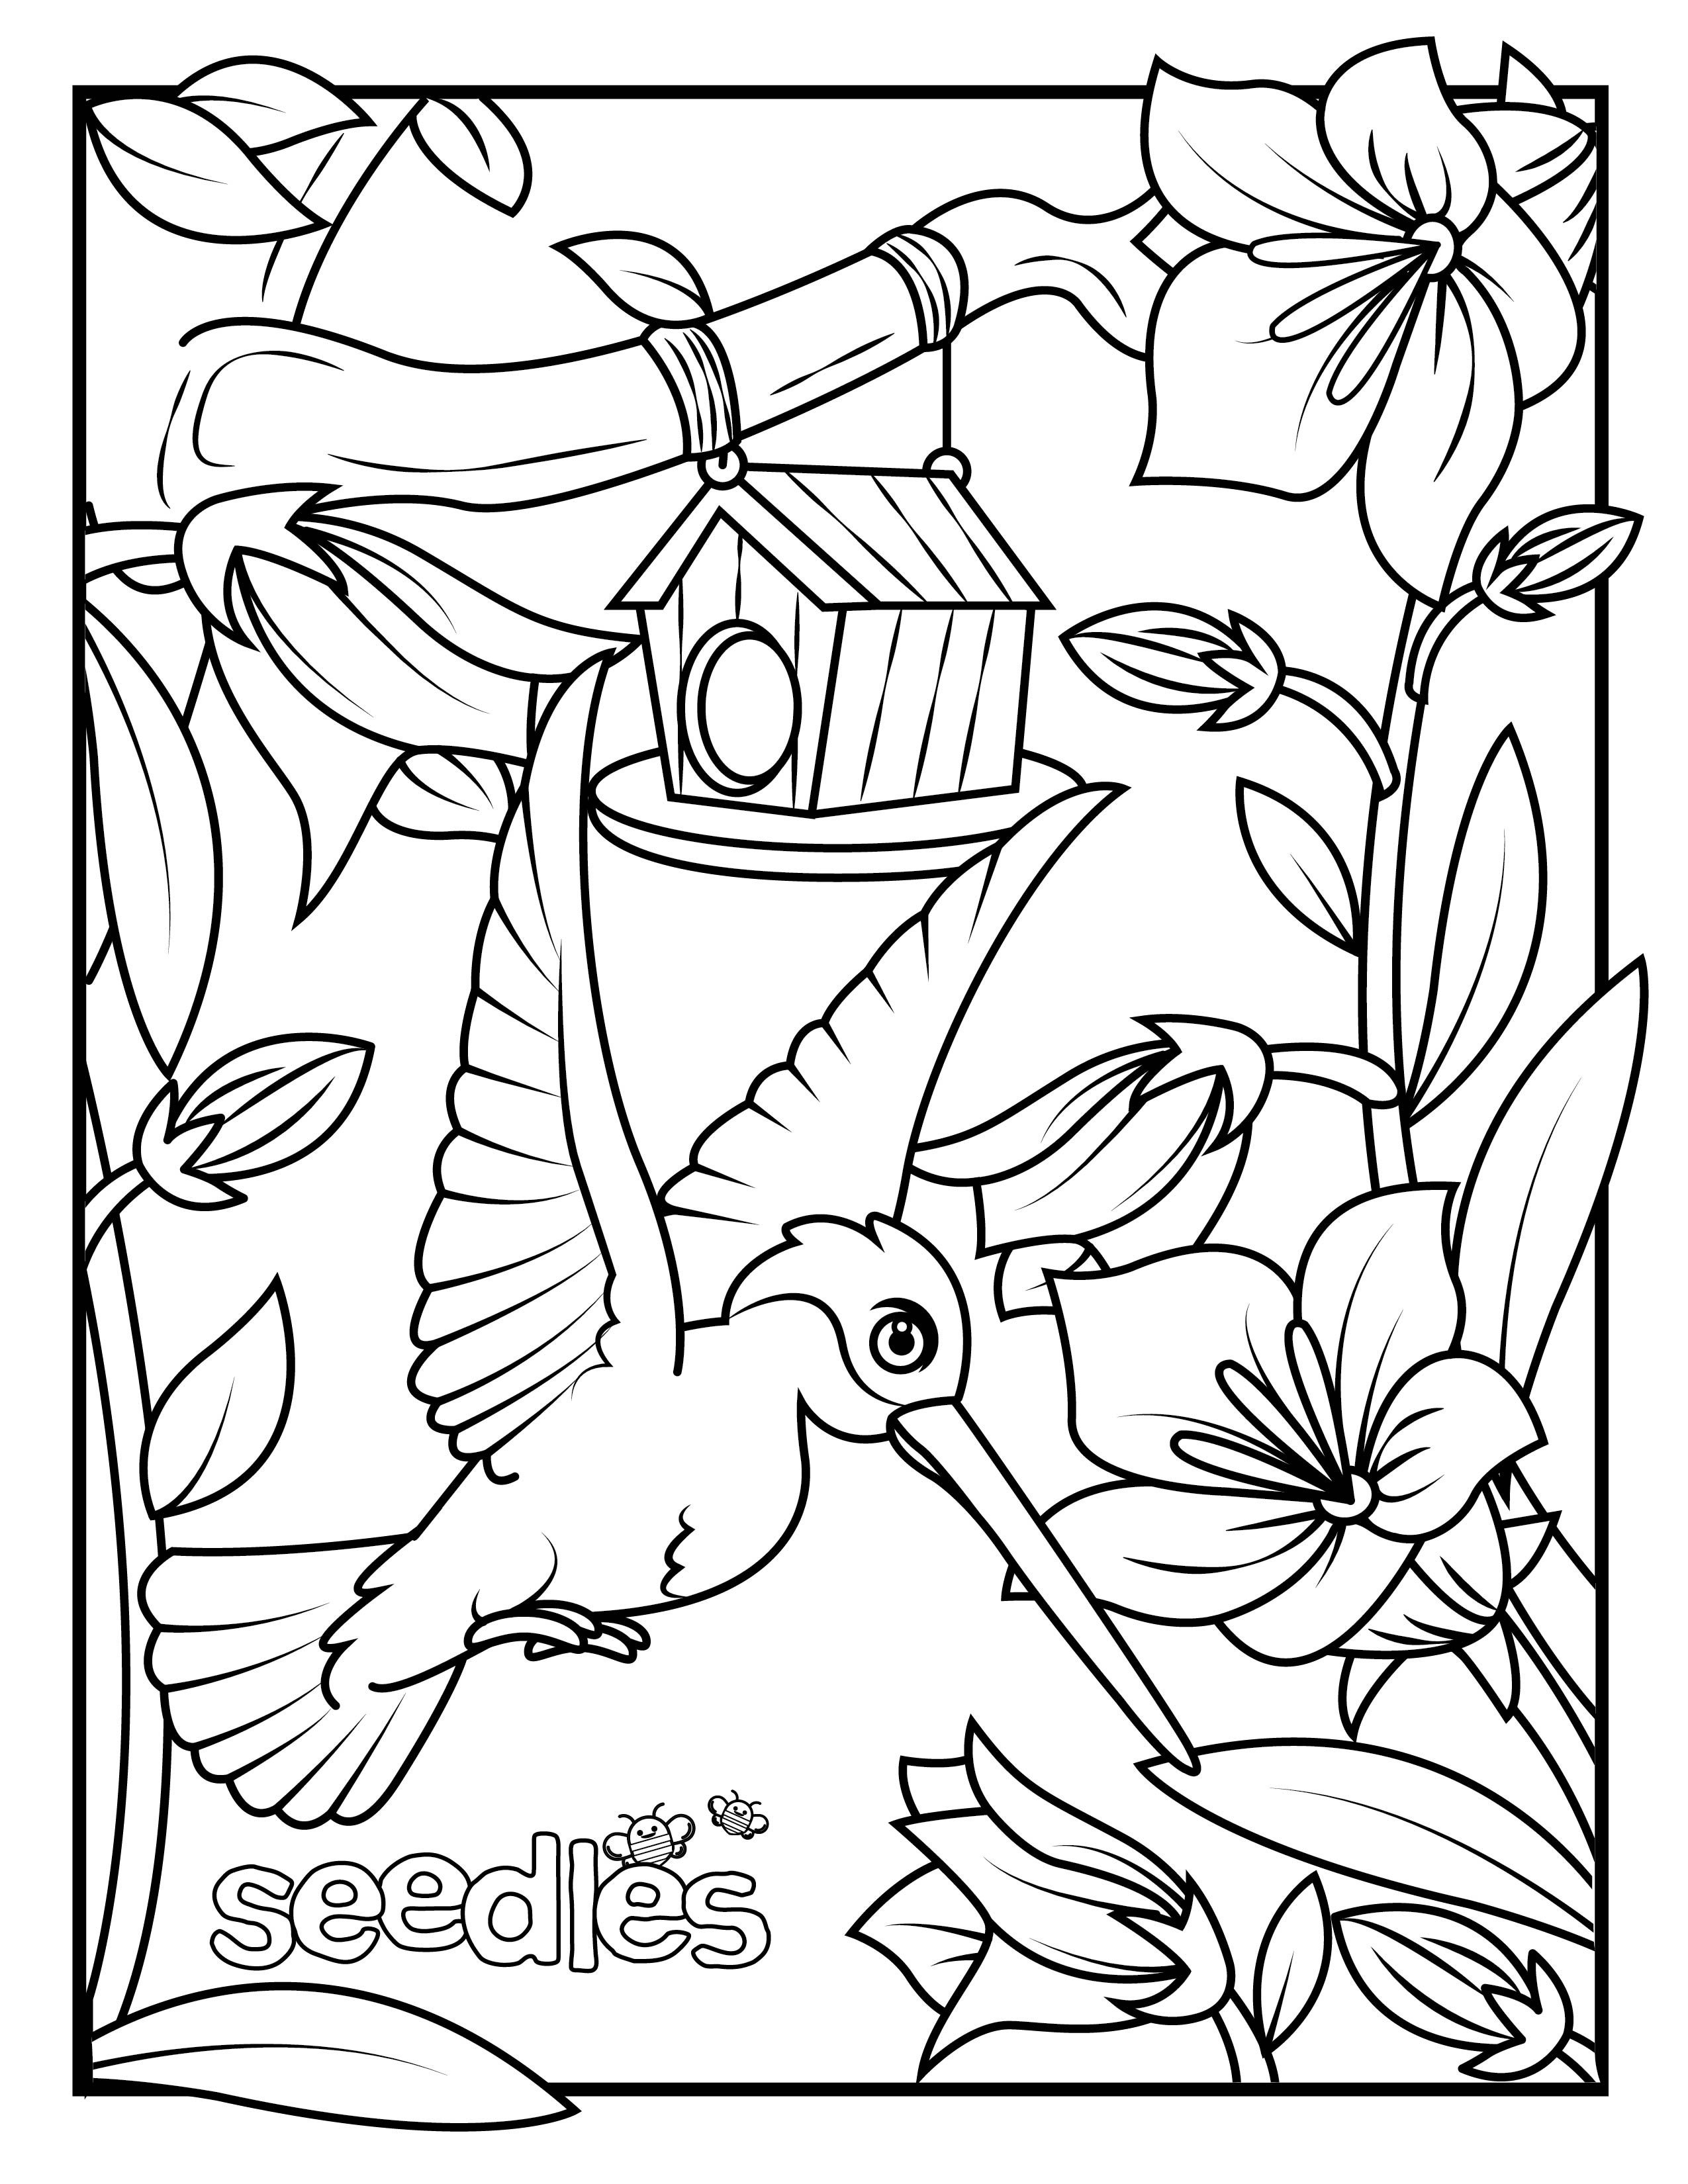 Download Free Coloring Books